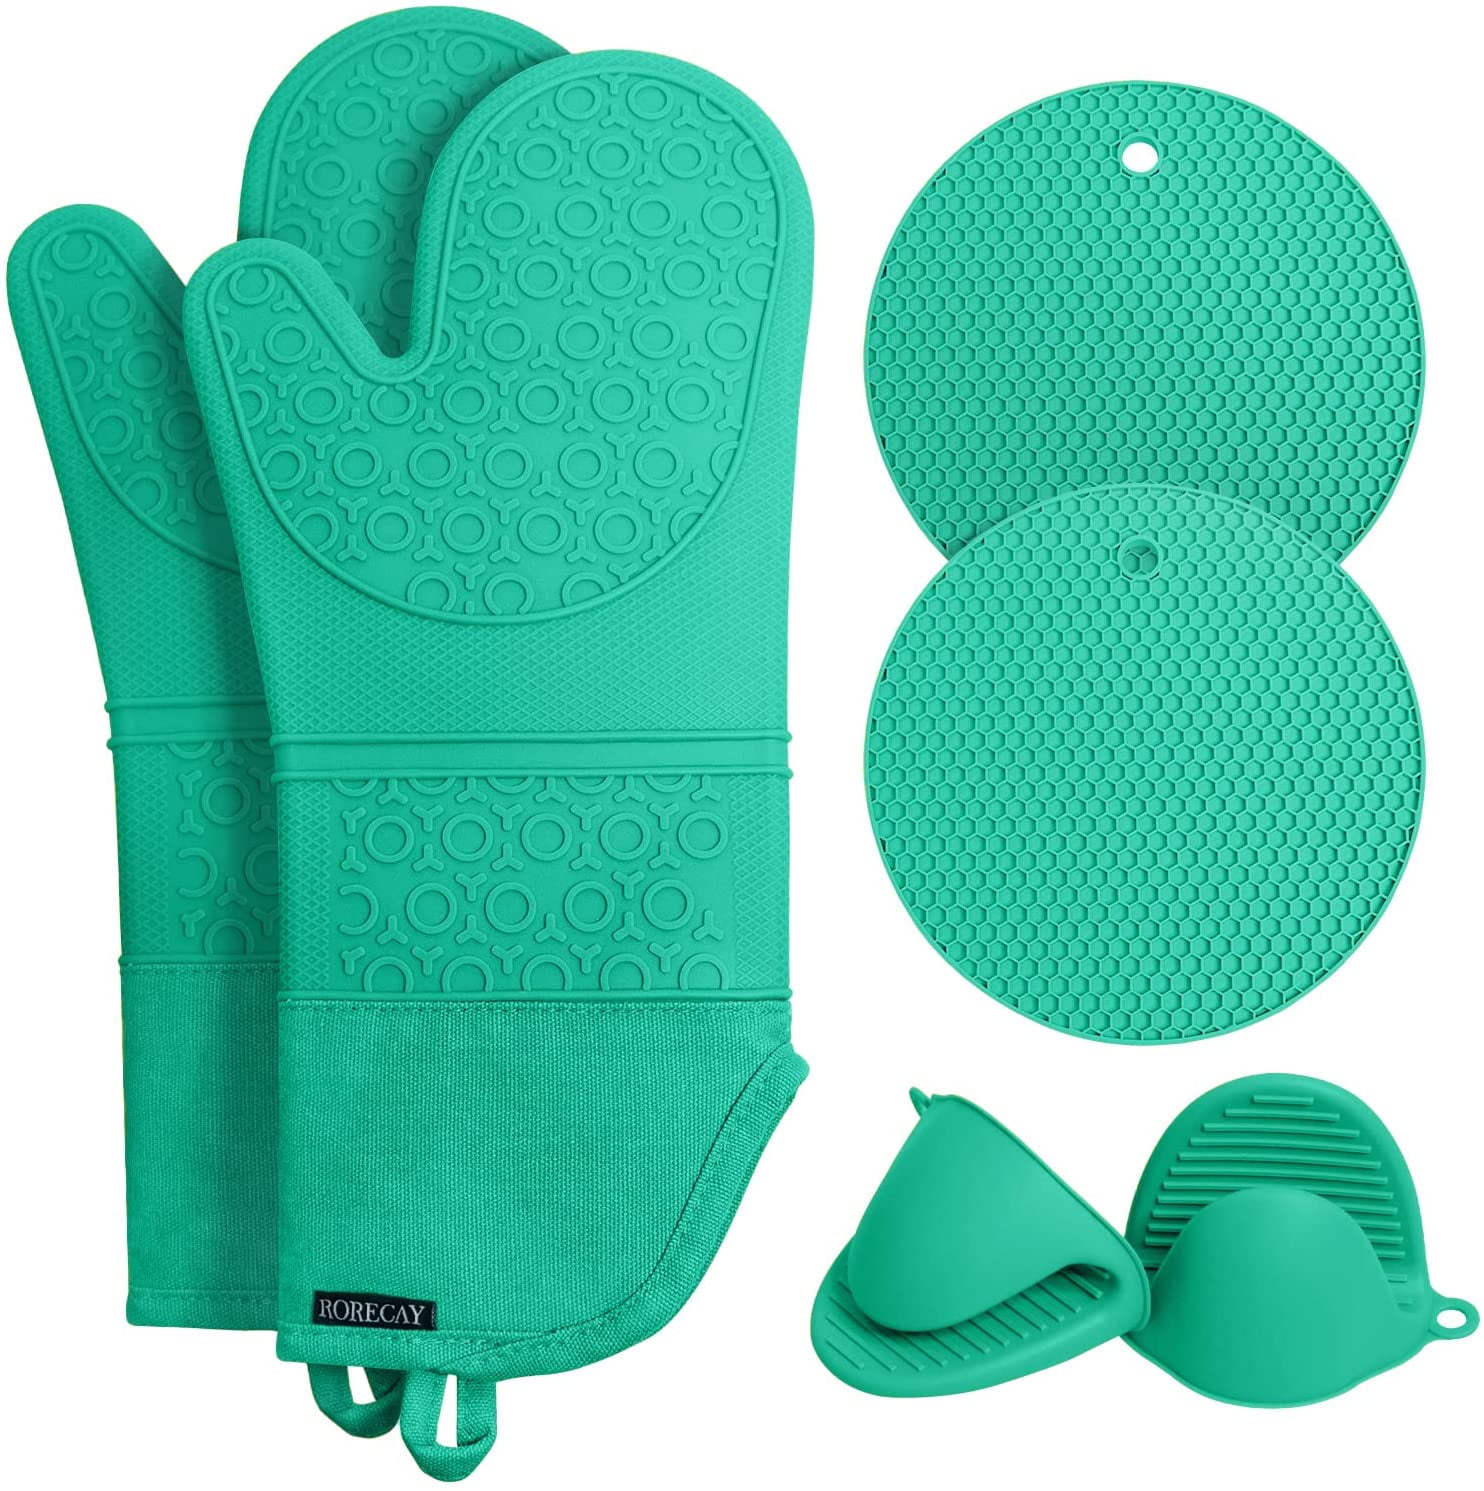 New ALL-CLAD Silicone Oven Mitts Pair Sea Glass Teal Green